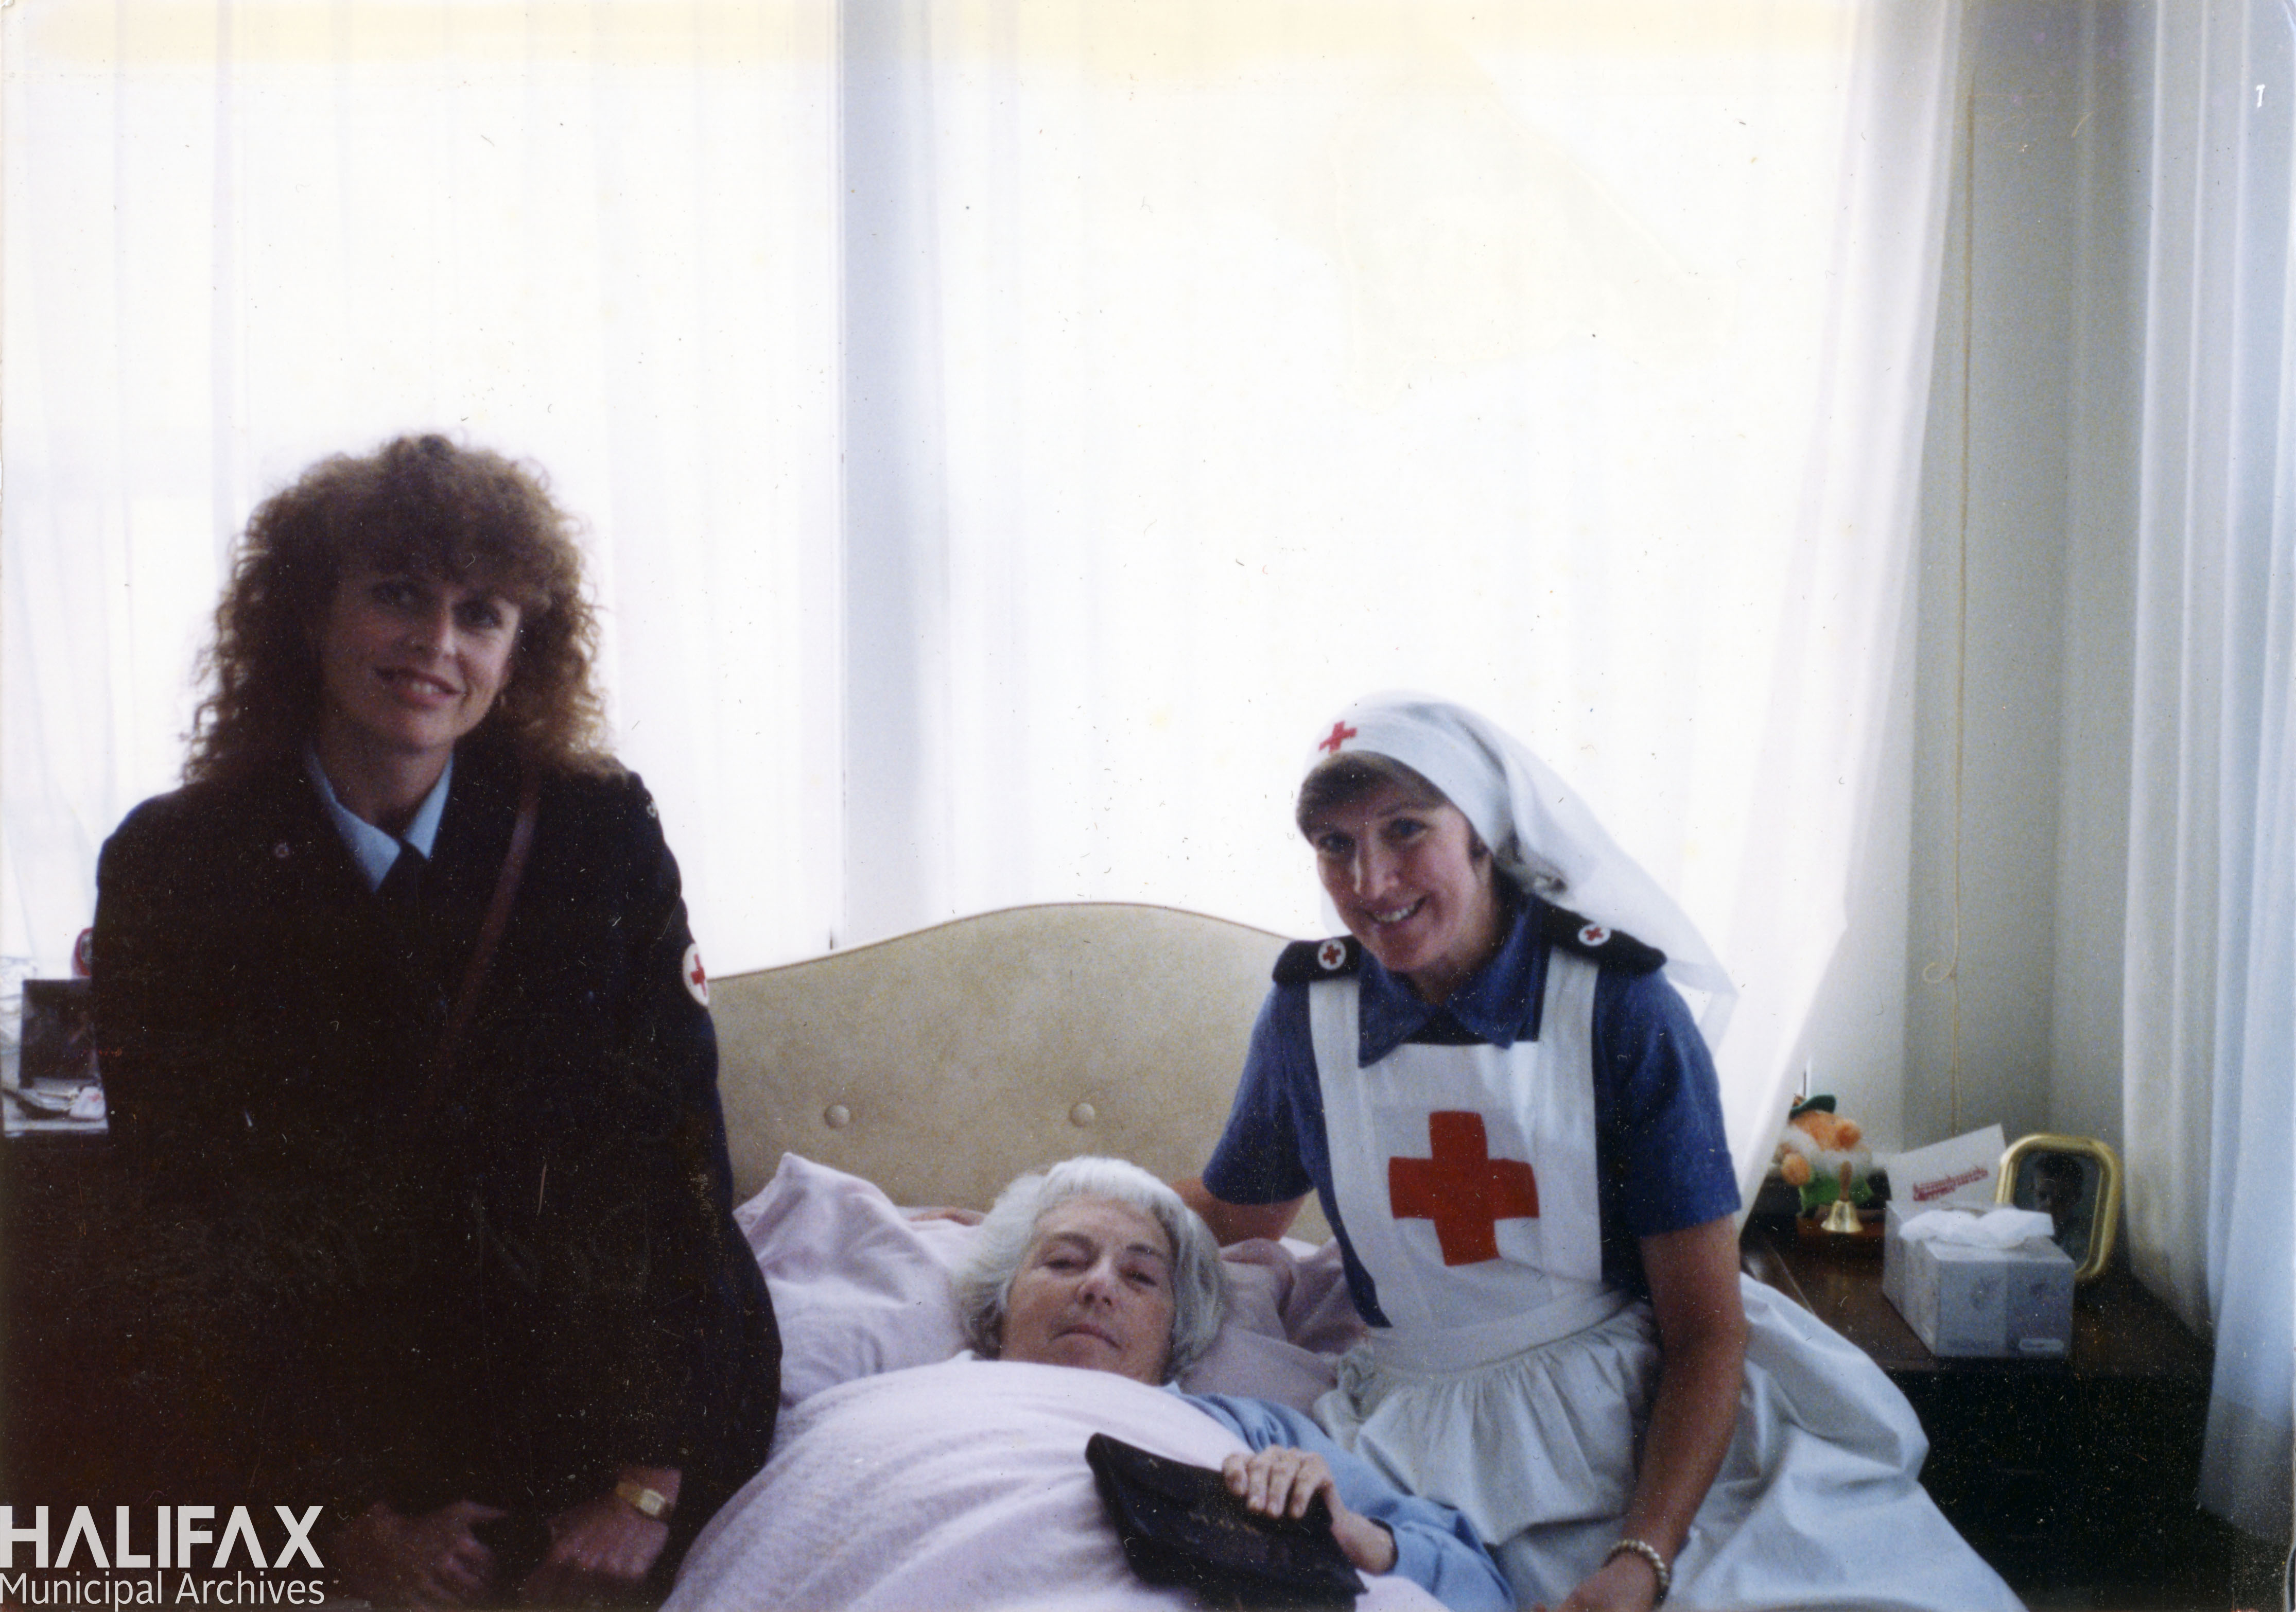 Colour image of 2 nurses on either side of elderly woman lying in a bed in front of a window.